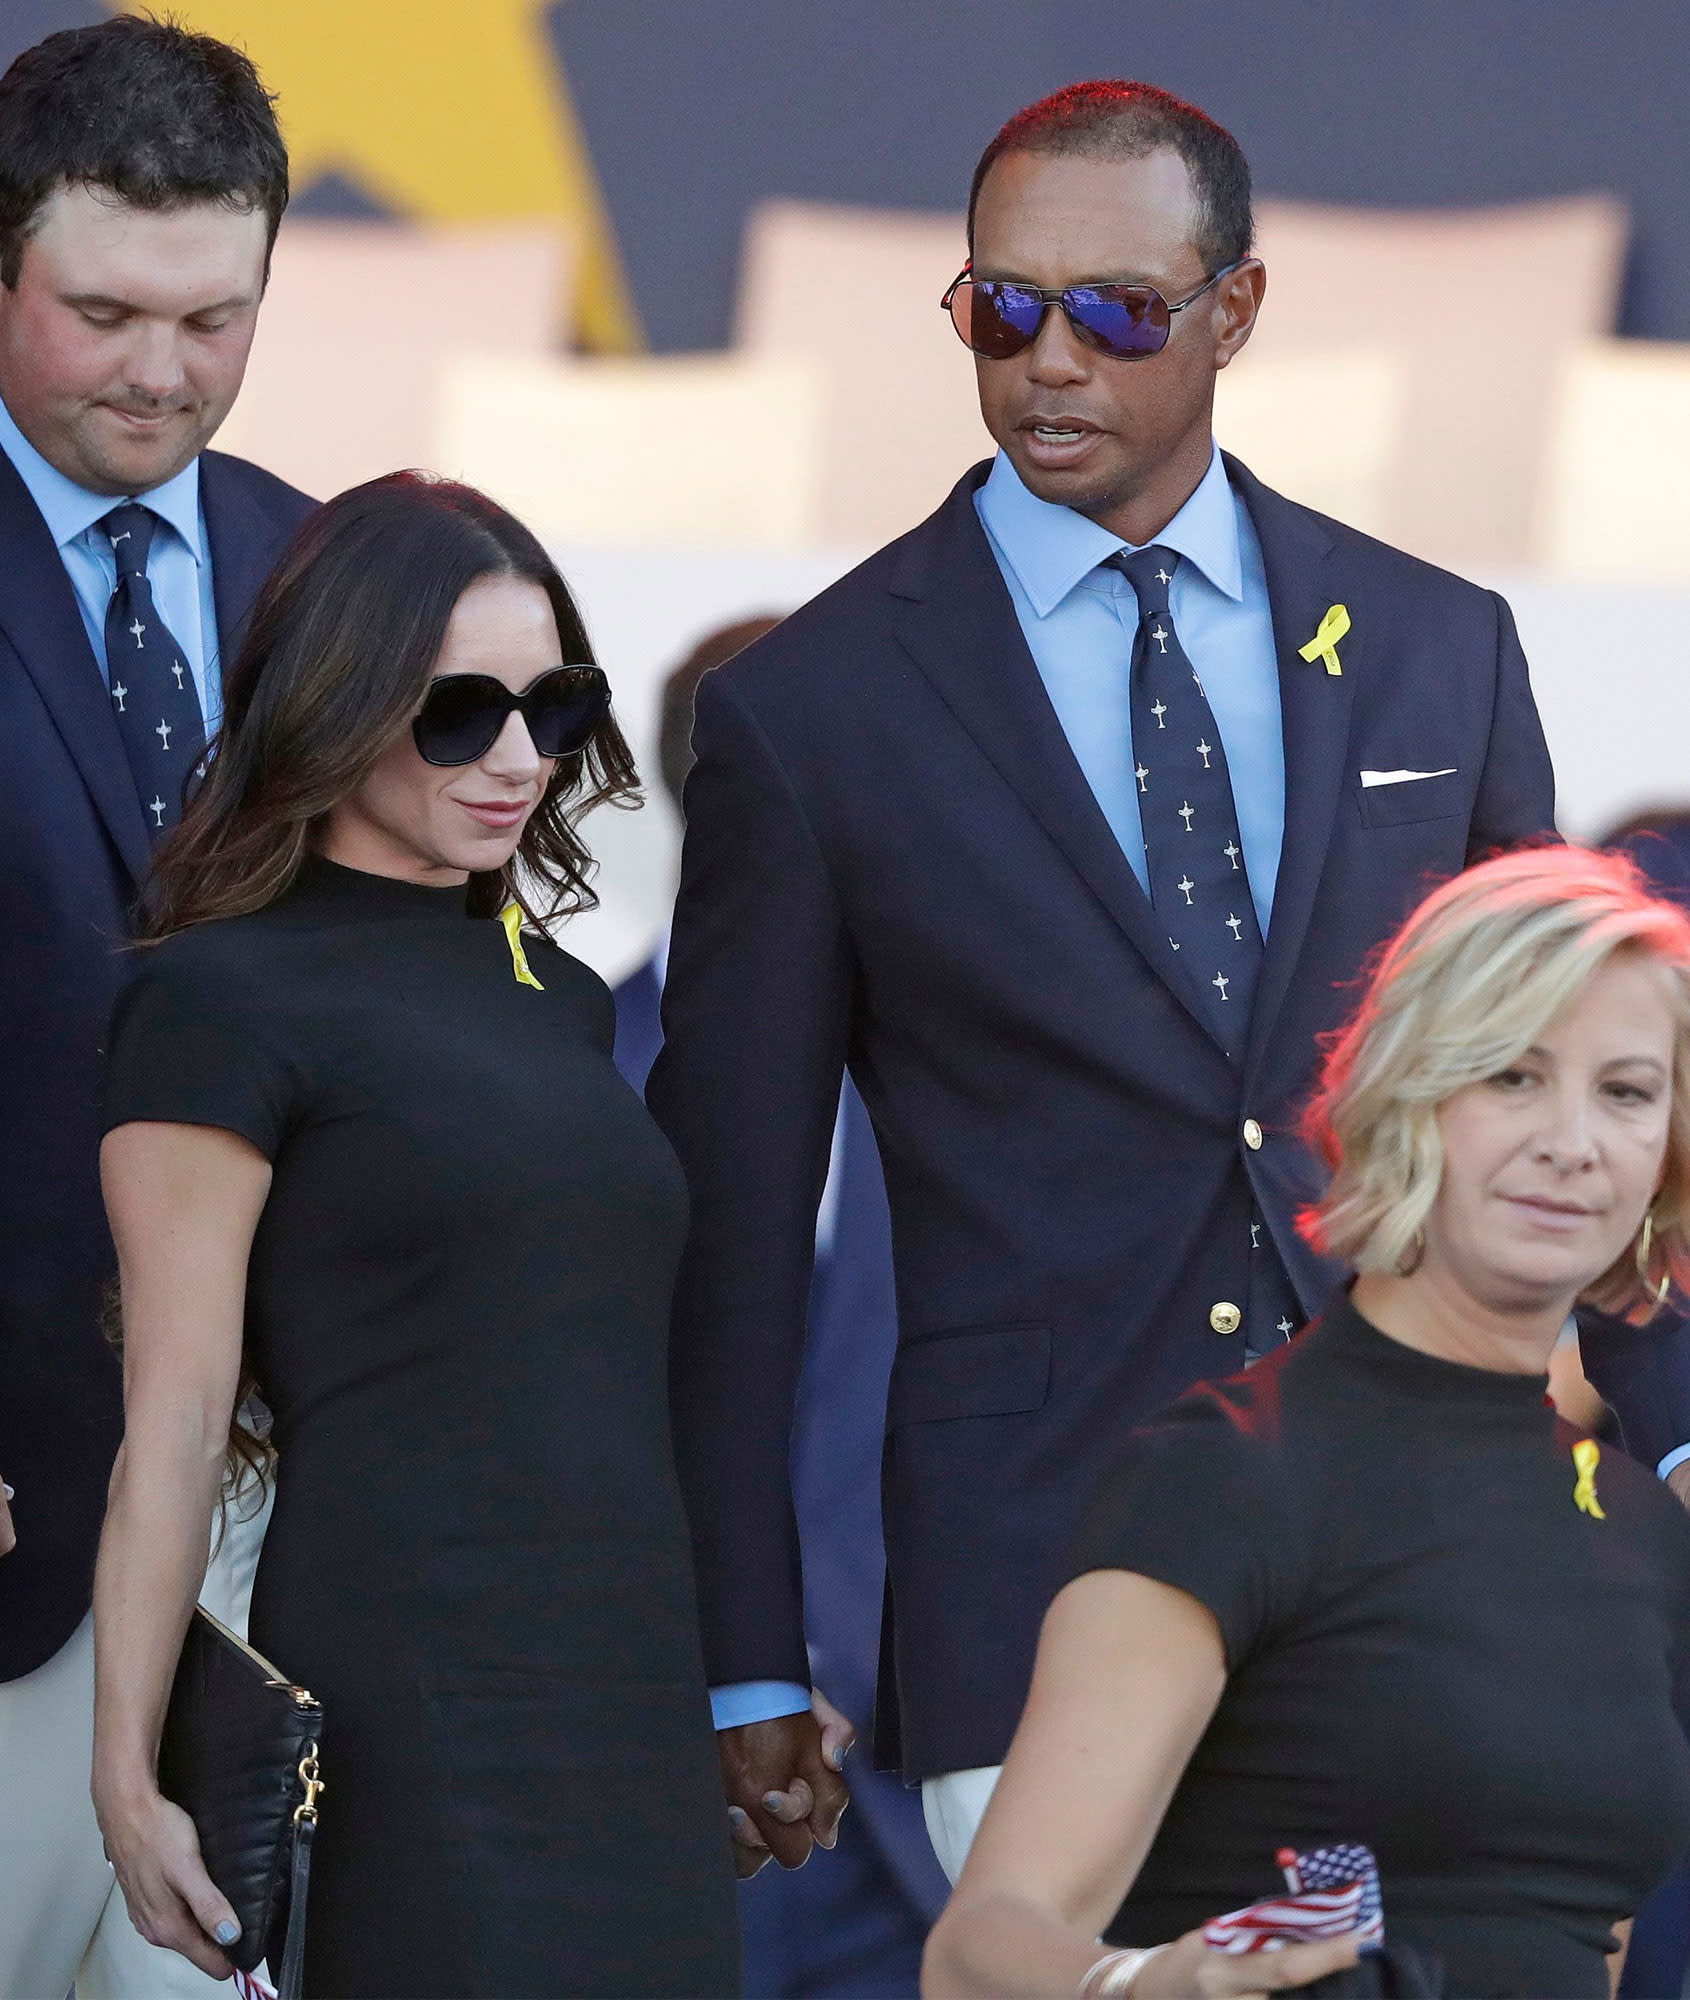 Tiger Woods and Girlfriend Erica Herman Walk Hand-in-Hand at 2018 Ryder Cup Opening ...